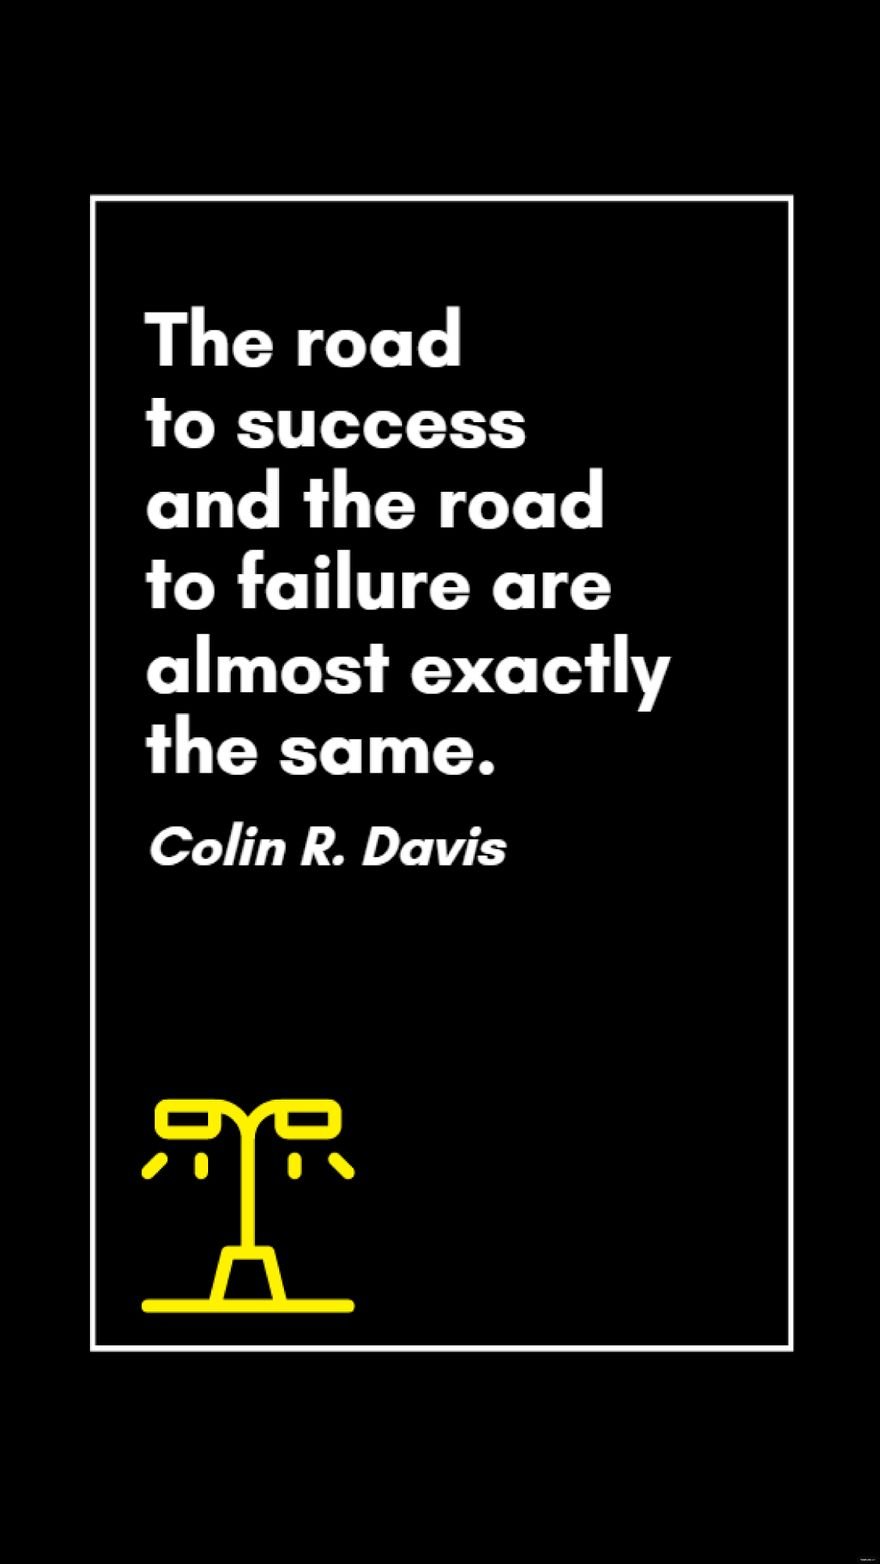 Free Colin R. Davis - The road to success and the road to failure are almost exactly the same. in JPG